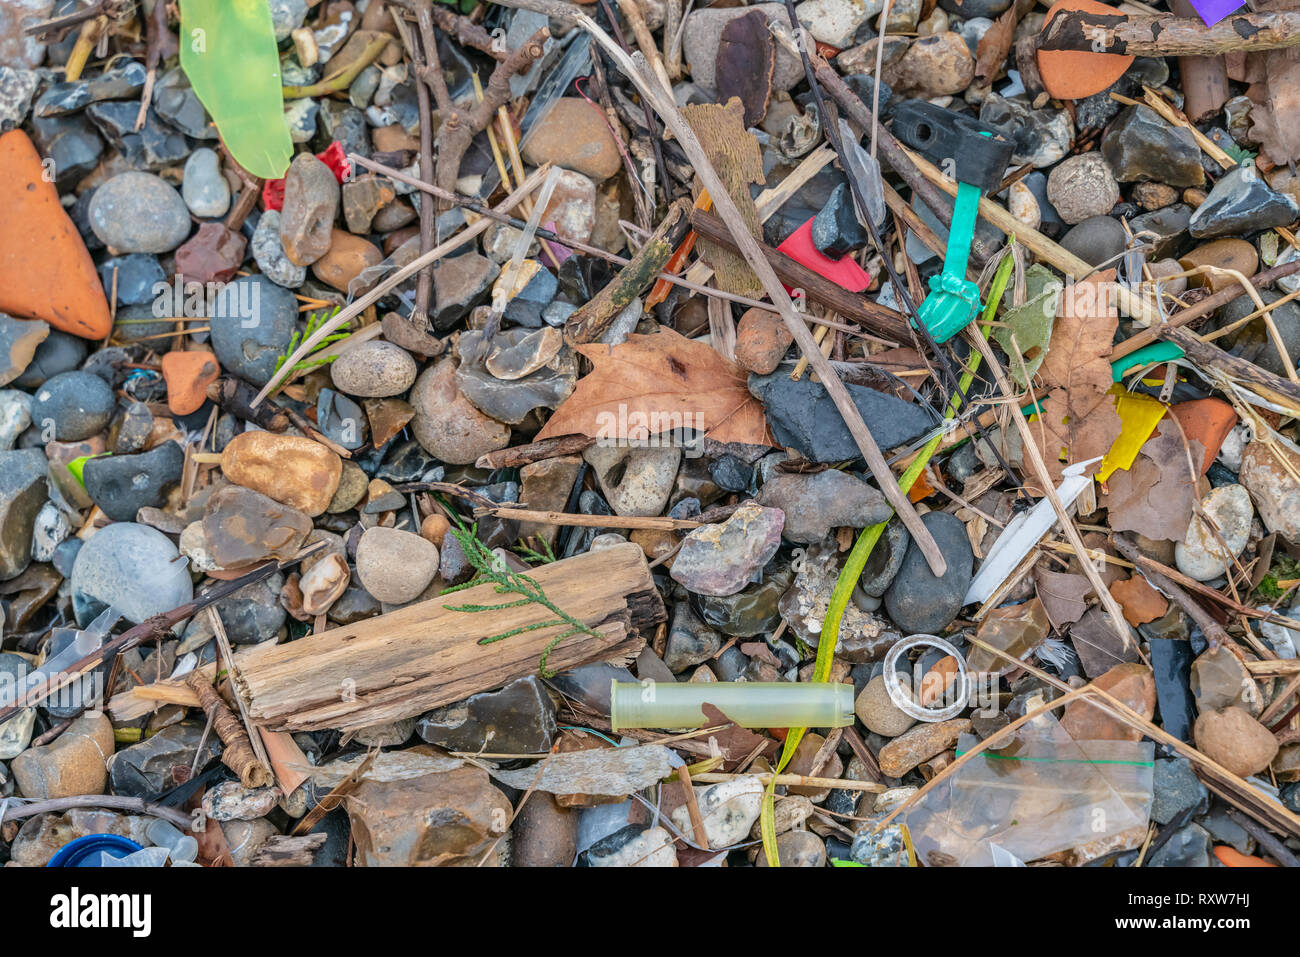 Spilled garbage on the beach of the big city. The accumulation of plastic objects in the Earth's environment adversely affects wildlife and humans. Stock Photo